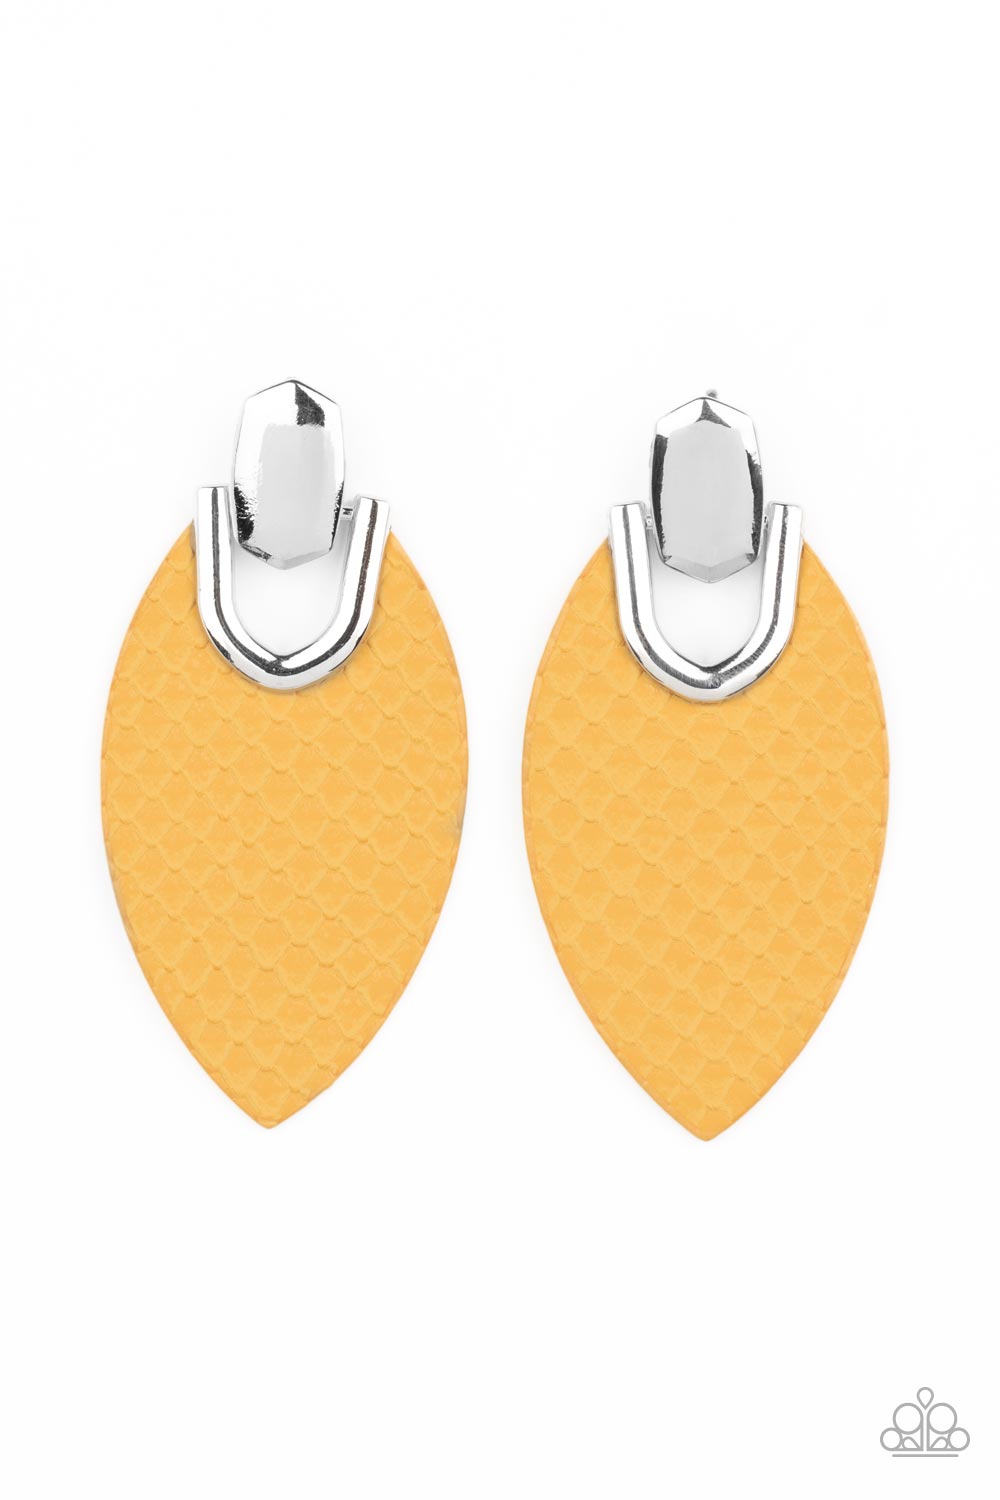 Wildly Workable Yellow Leather Earrings - Paparazzi Accessories- lightbox - CarasShop.com - $5 Jewelry by Cara Jewels